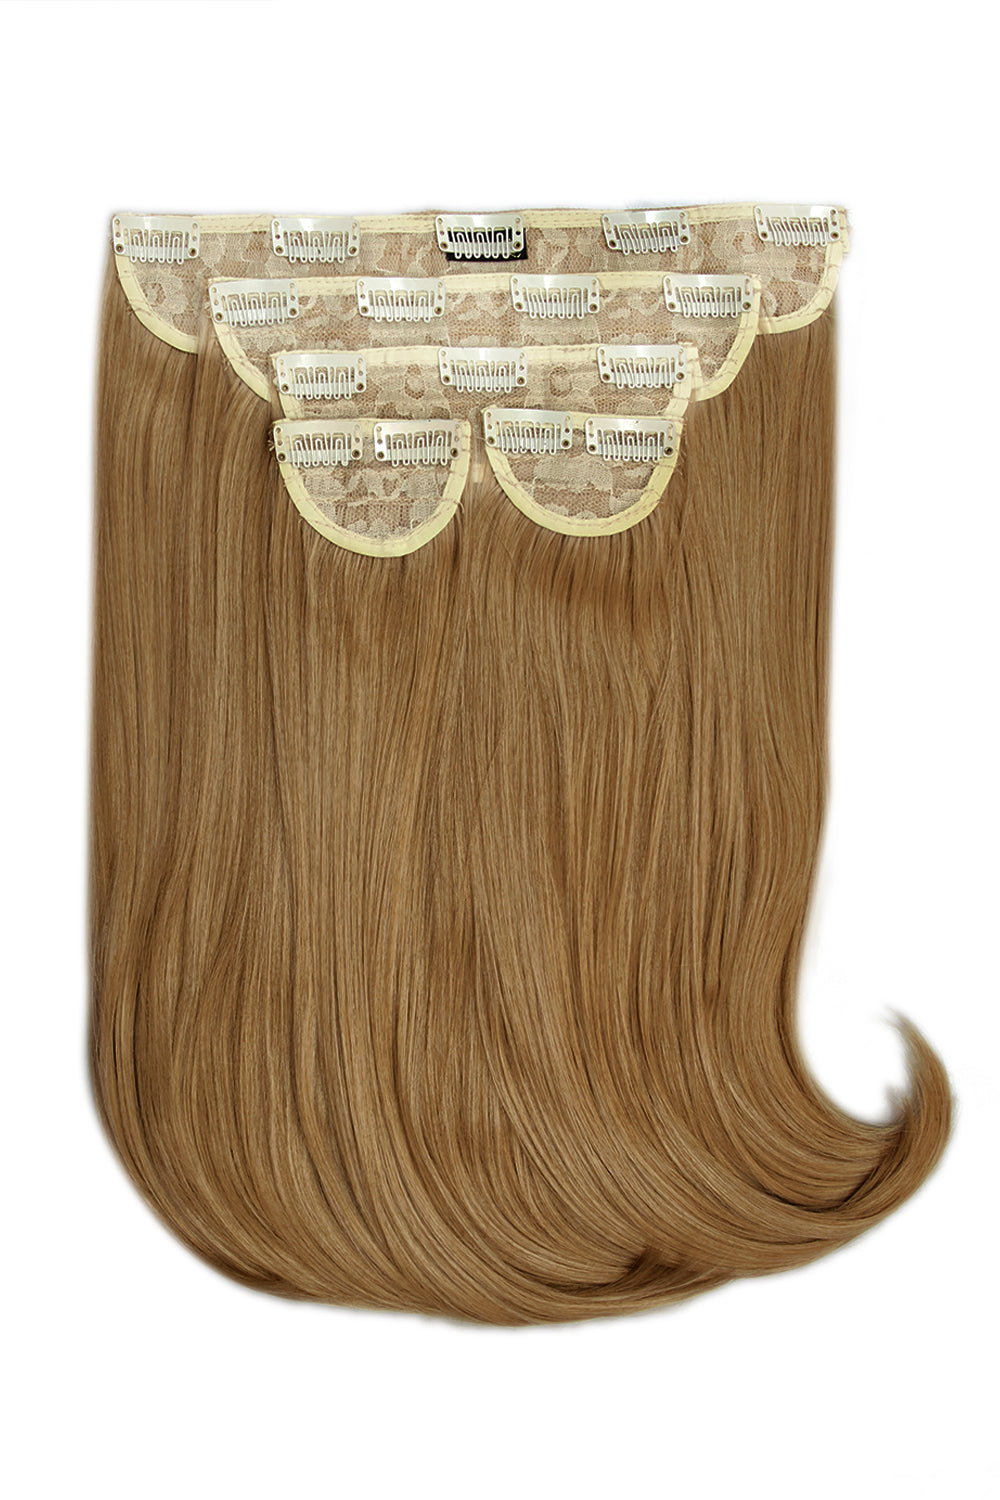 Super Thick 16" 5 Piece Curve Clip in Hair Extensions + Hair Care Bundle - Harvest Blonde